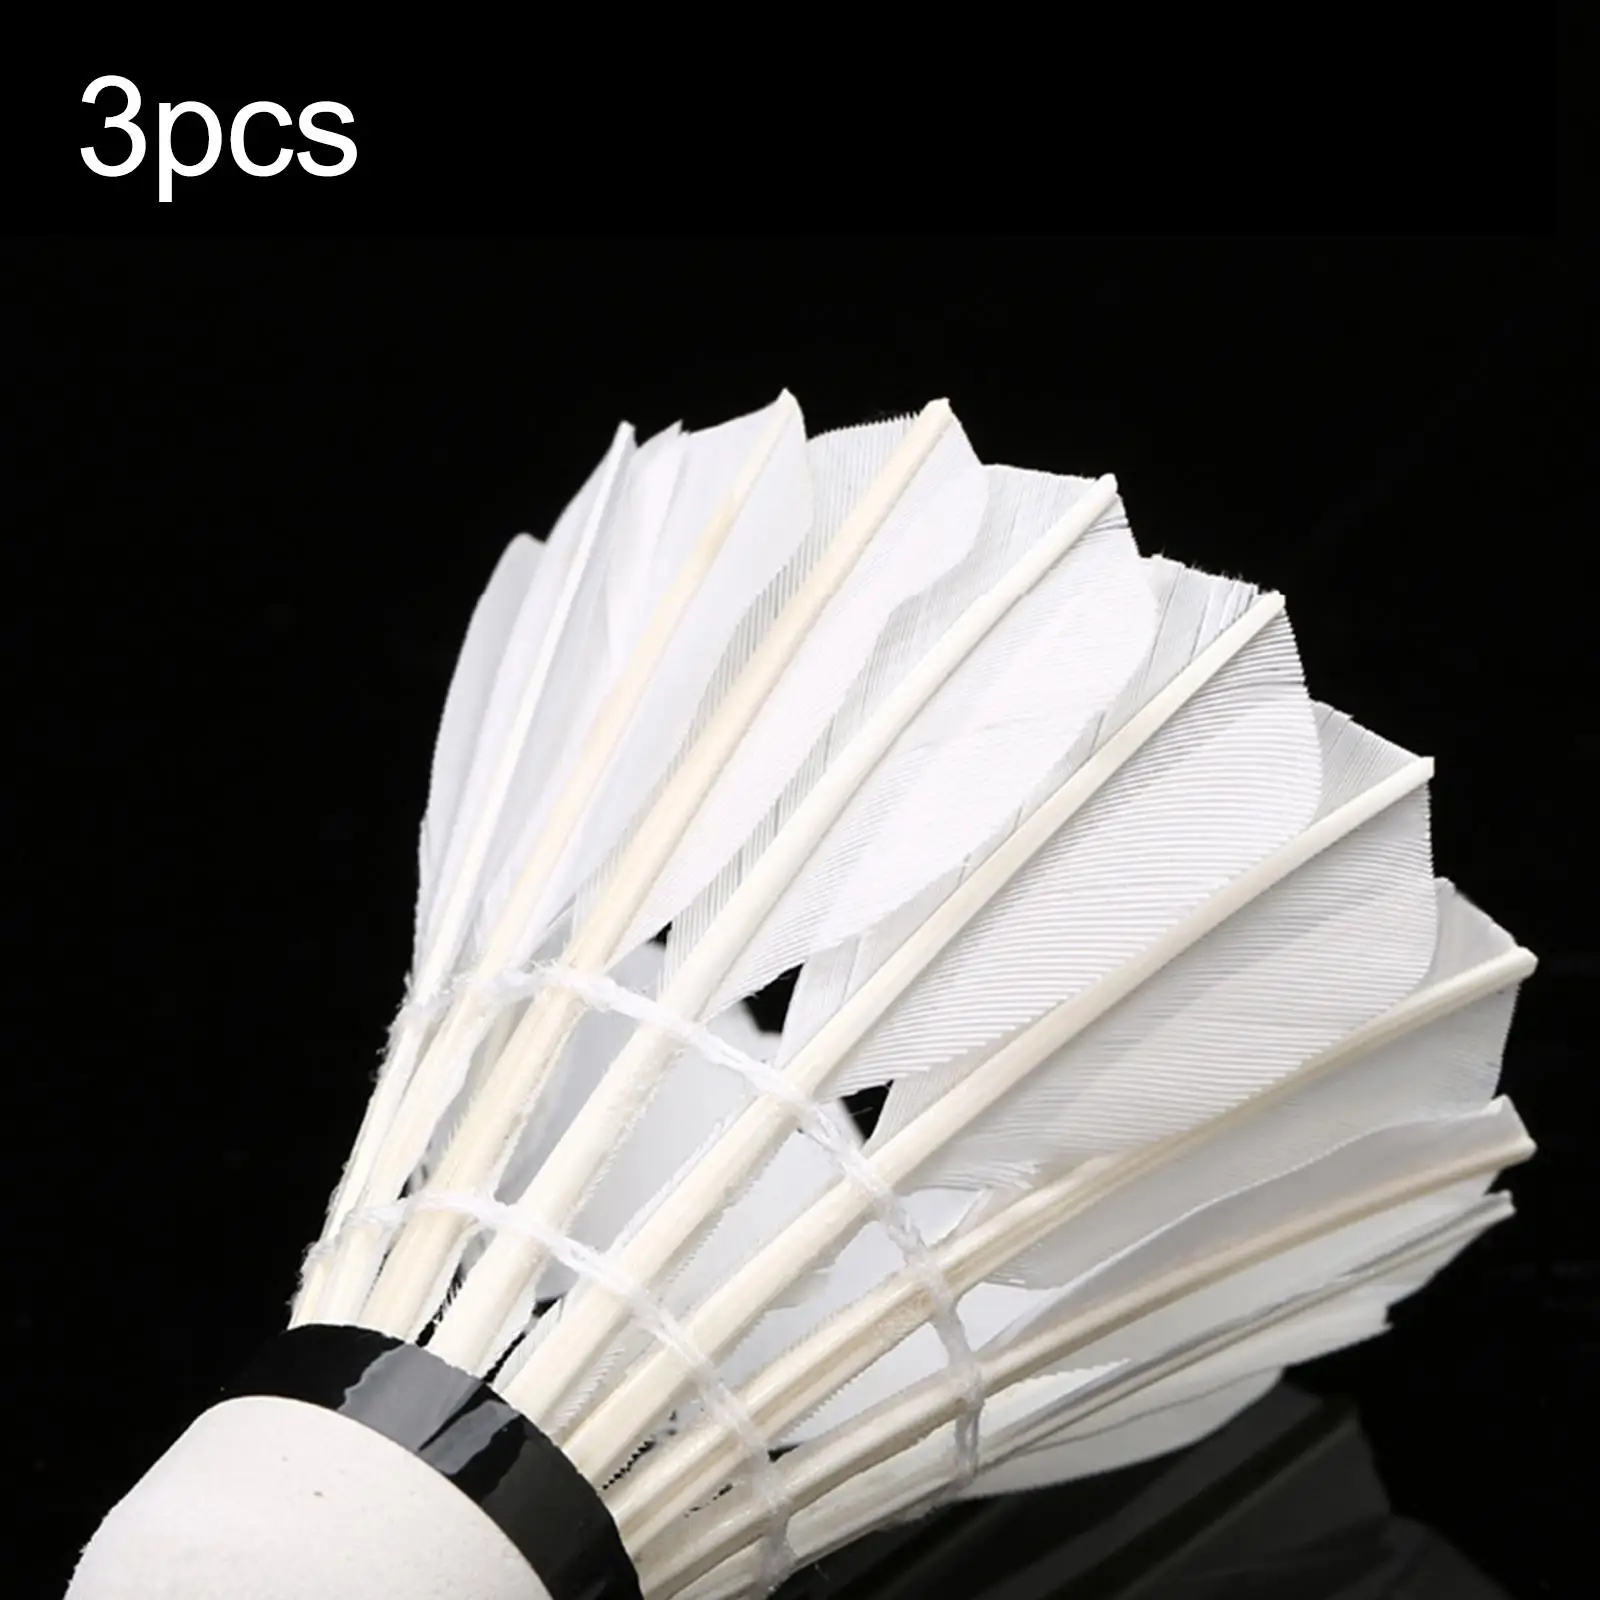 3x Badminton Shuttlecocks White for Recreational Game Play Sports Activities